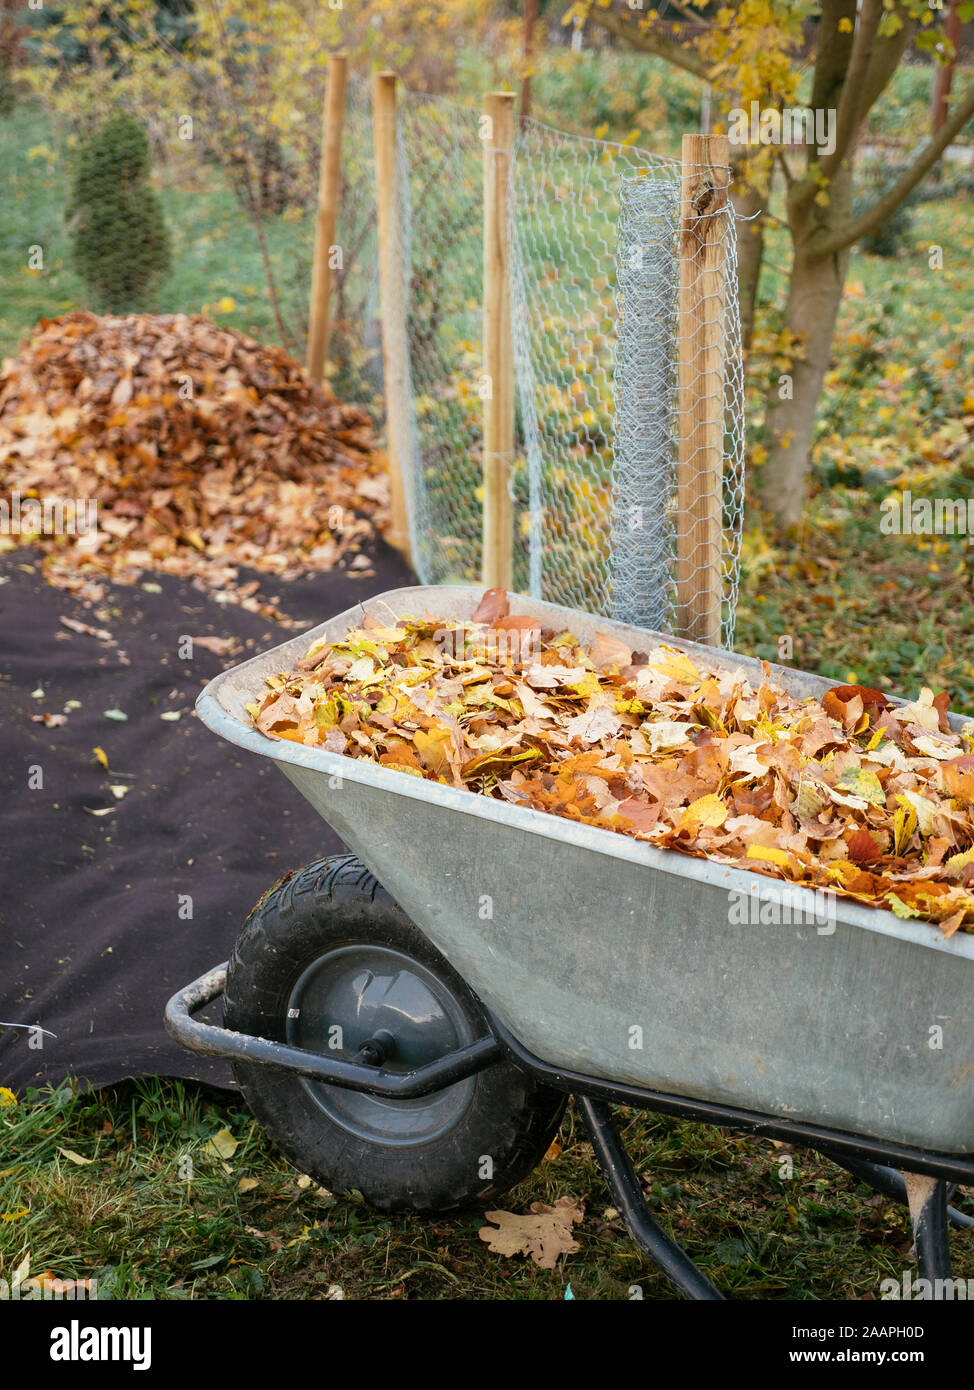 Leaf cage with biodegradable ground cover being filled with leaves to make leaf mold. Stock Photo